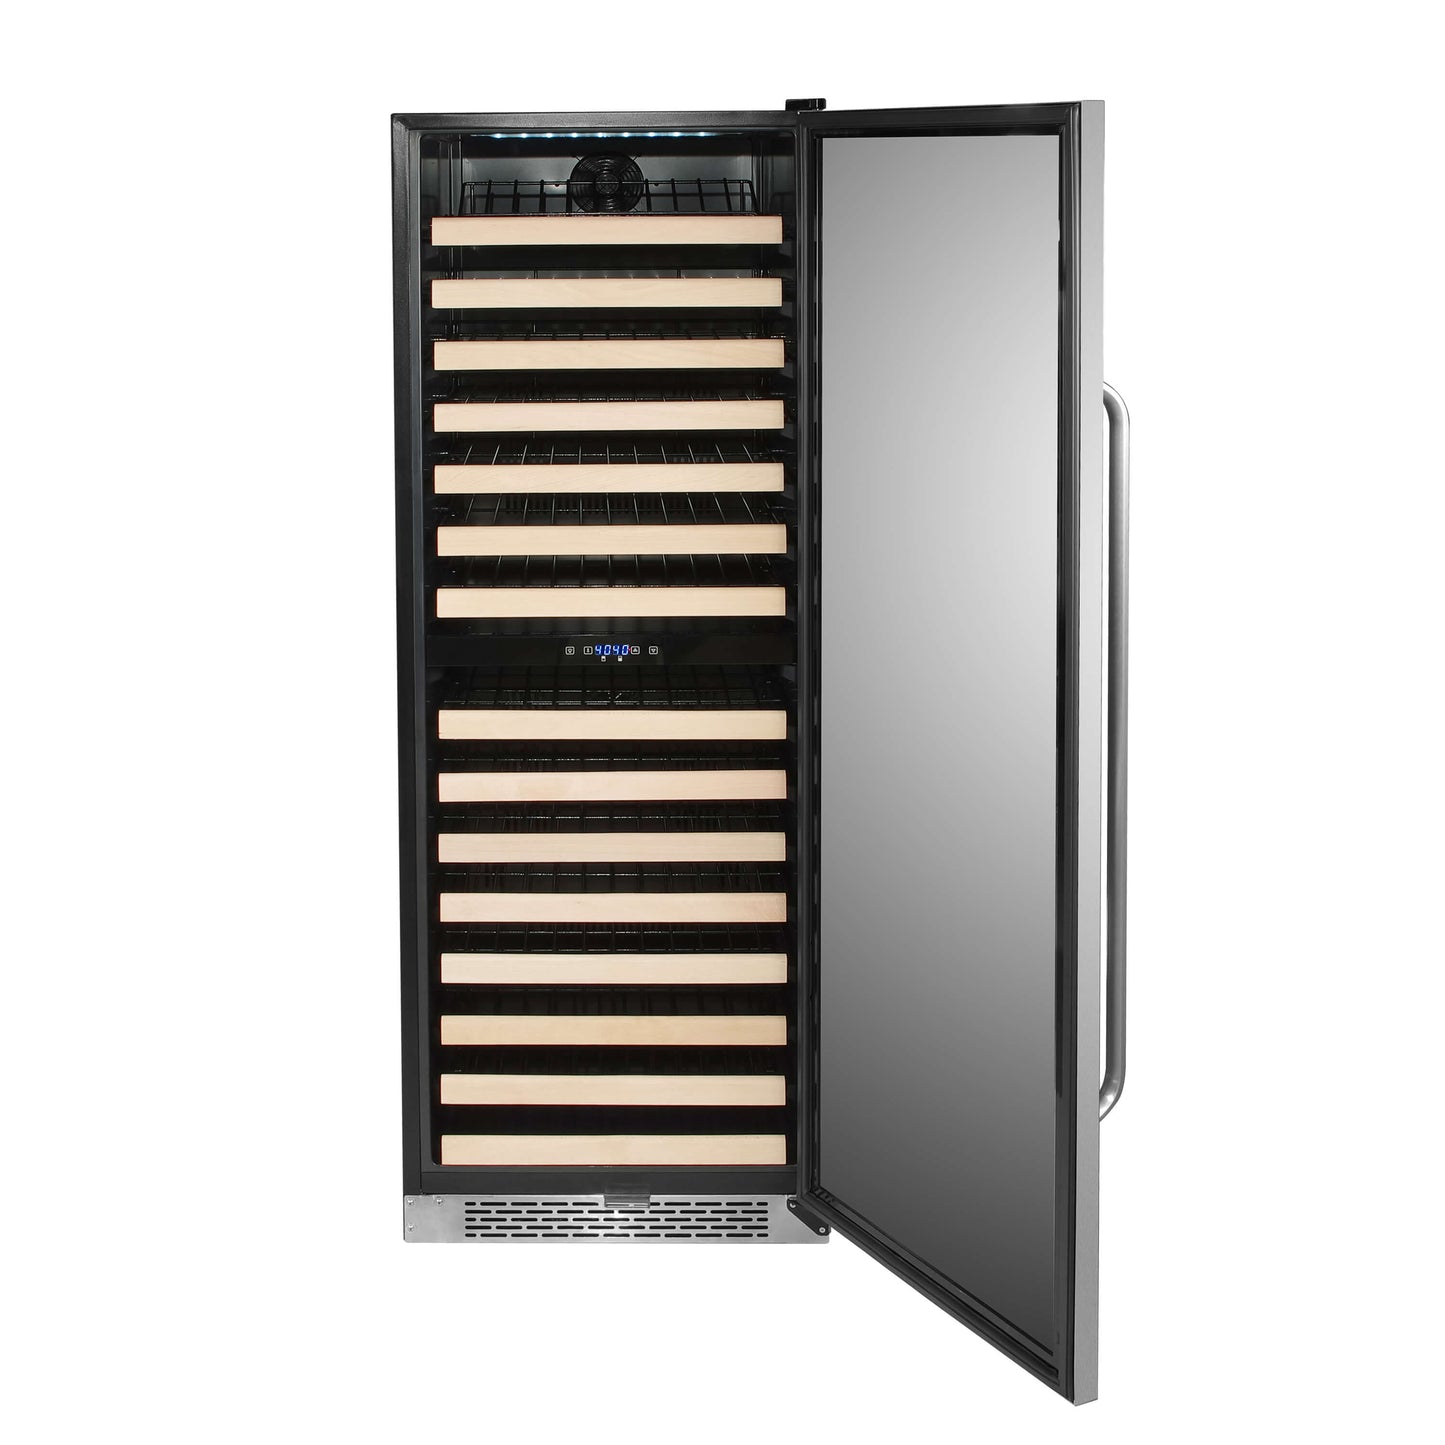 Whynter Wine Refrigerator Whynter BWR-1642DZ/BWR-1642DZa 164 Bottle Built-in Stainless Steel Dual Zone Compressor Wine Refrigerator with Display Rack and LED display